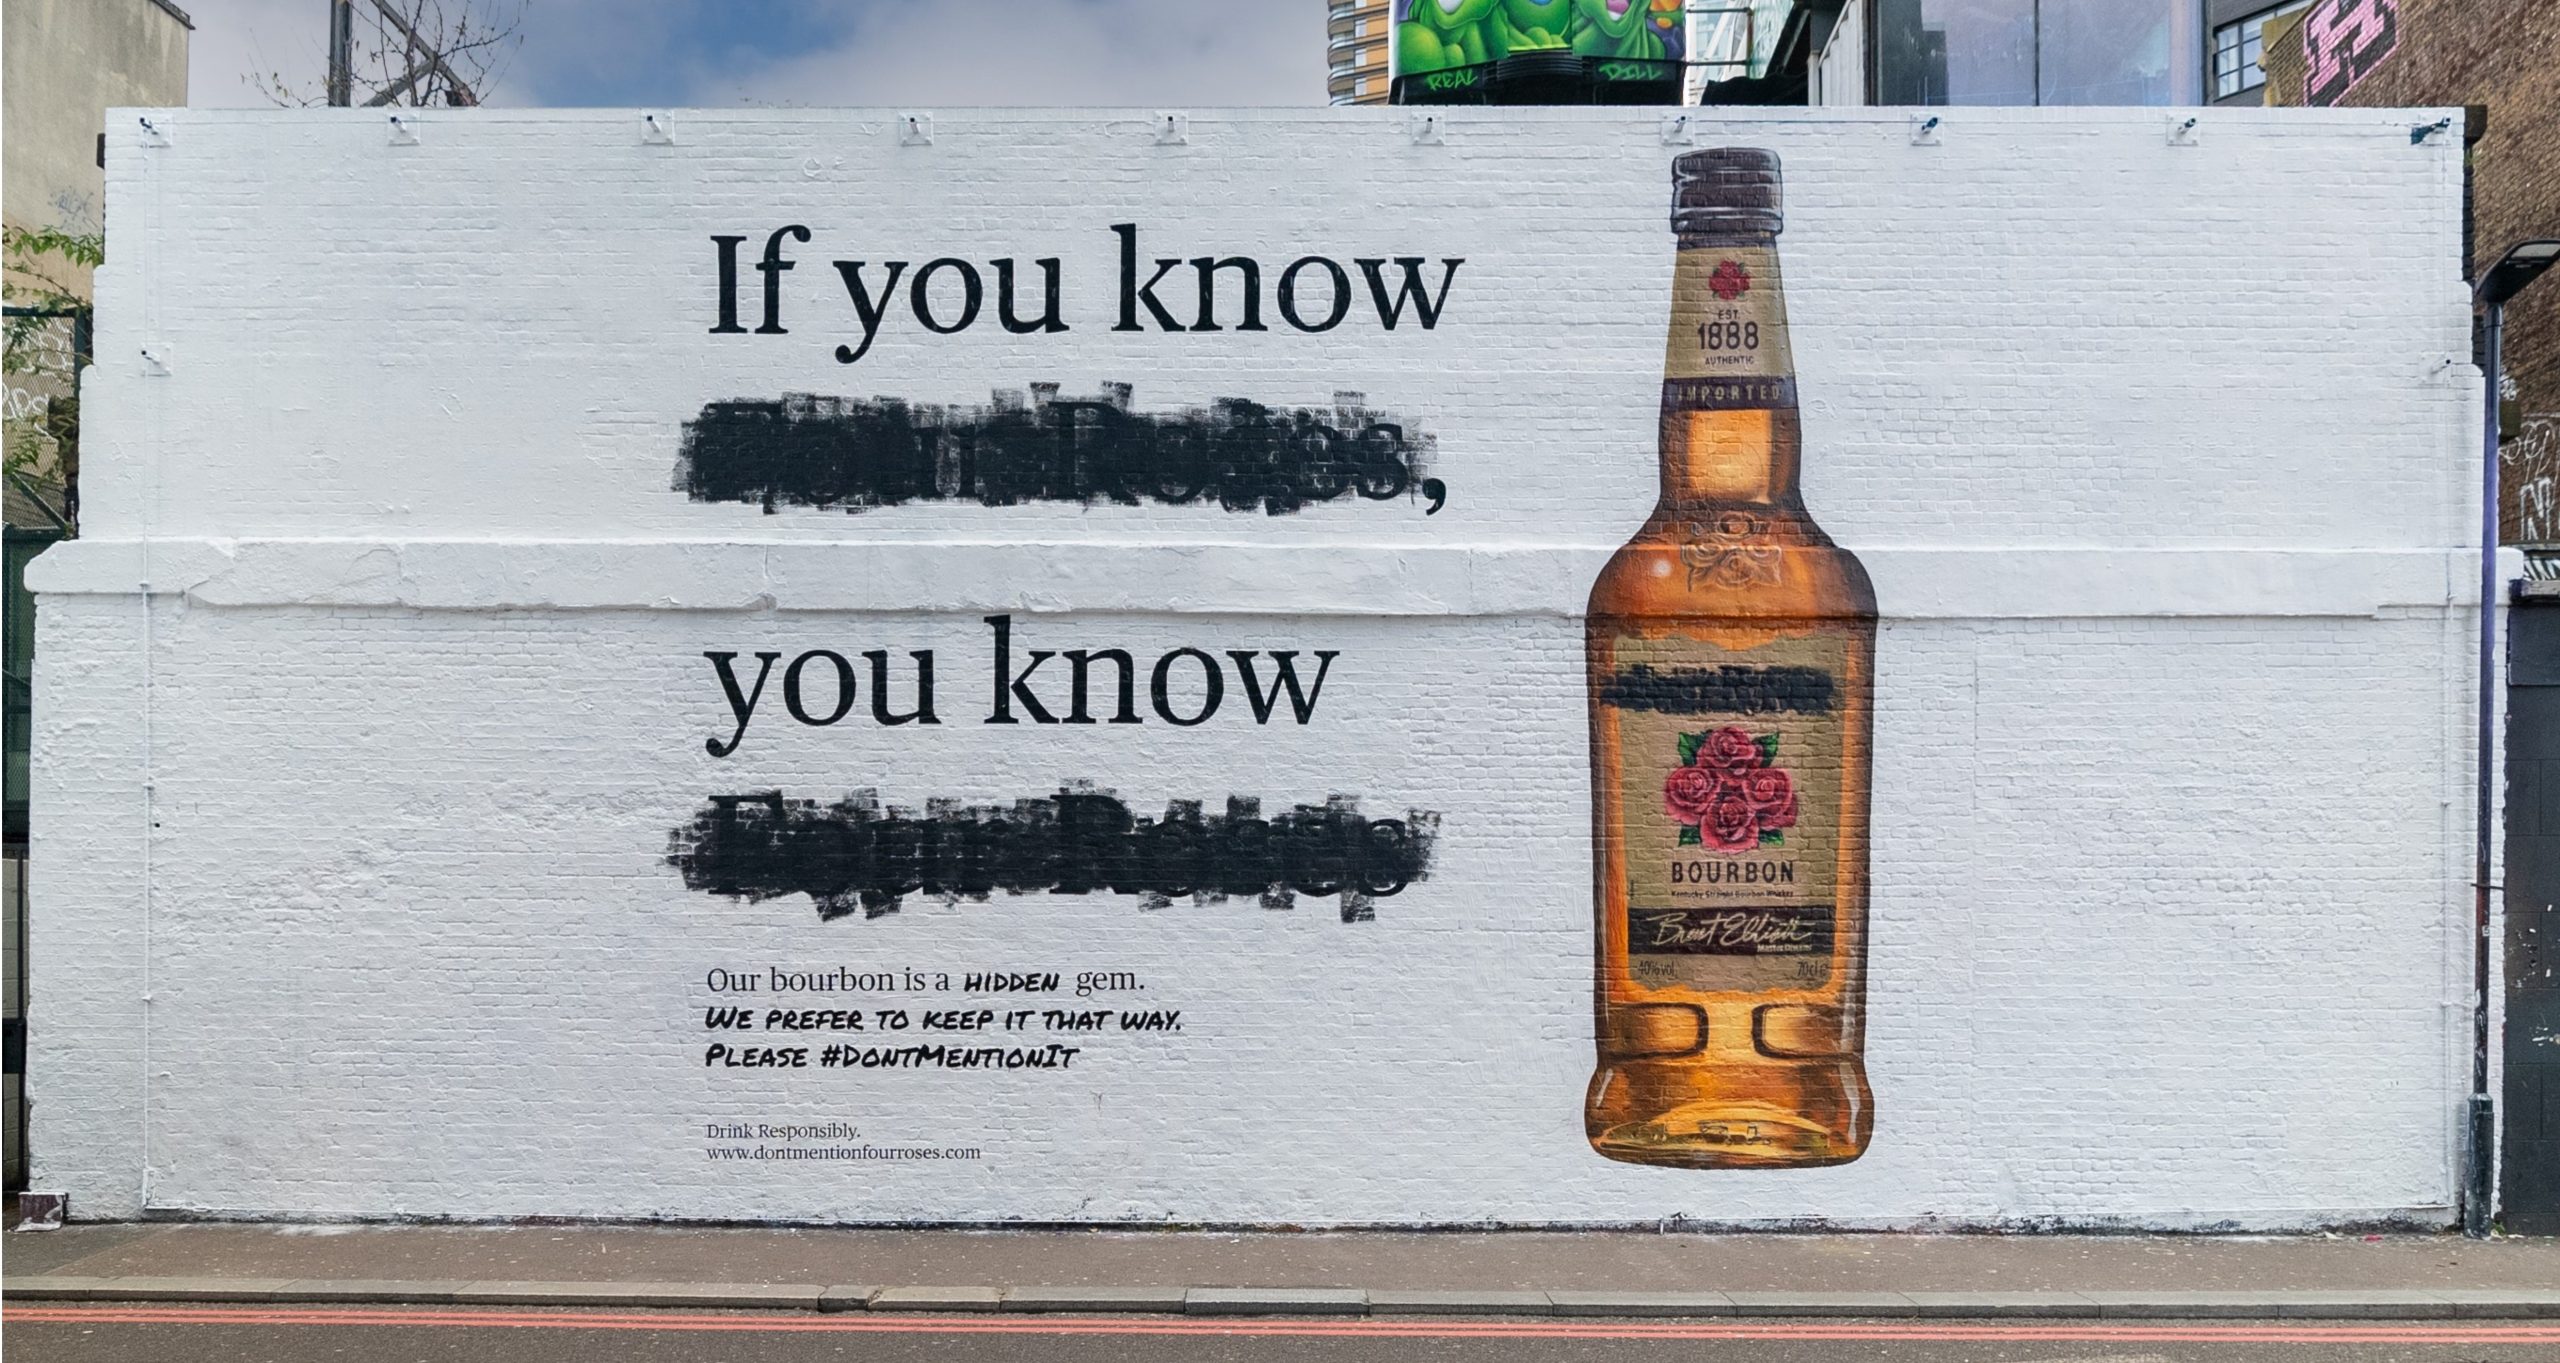 First ad campaign for Four Roses bourbon